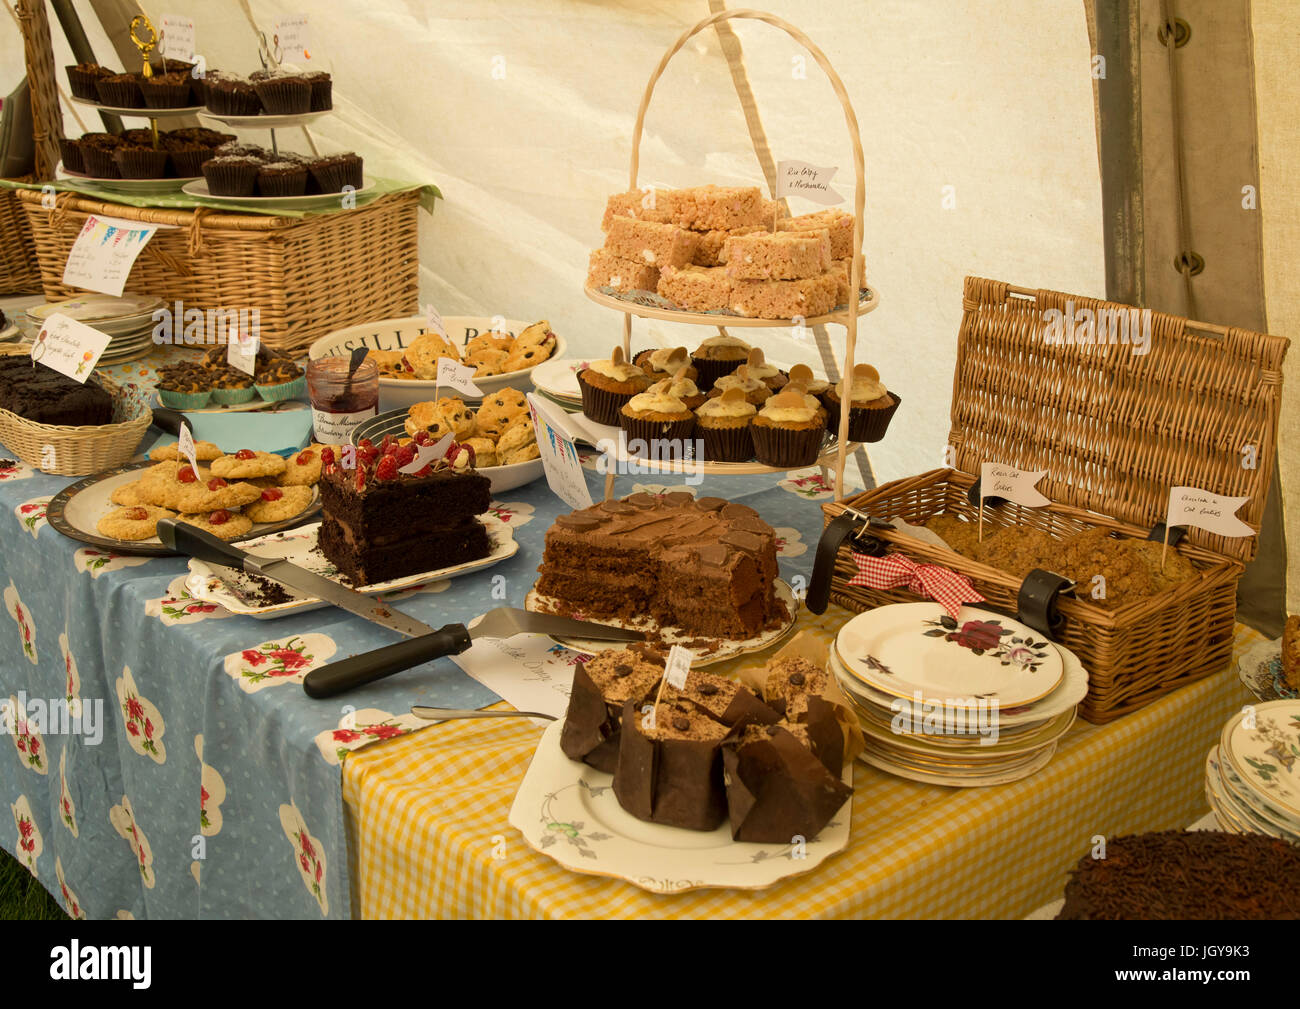 Cake Display At An English Refreshment Marquee Stock Photo Alamy